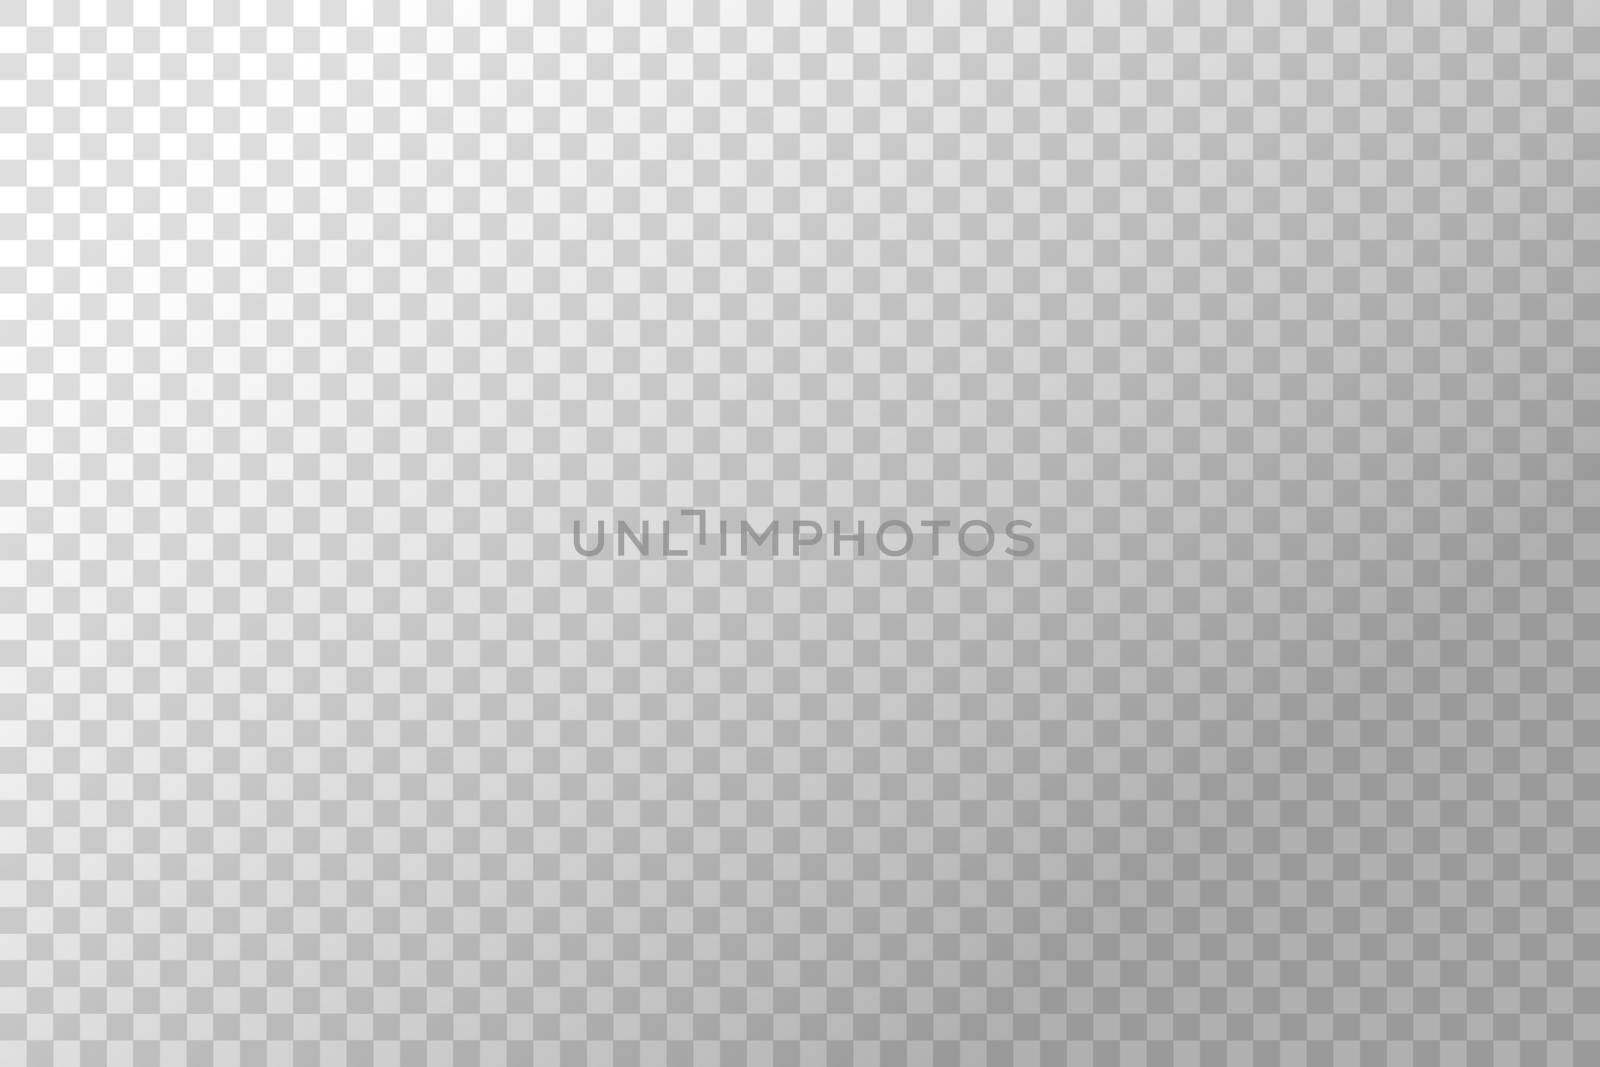 Transparent background. Transparency checker grid. Checkered vector texture. by Elena_Garder